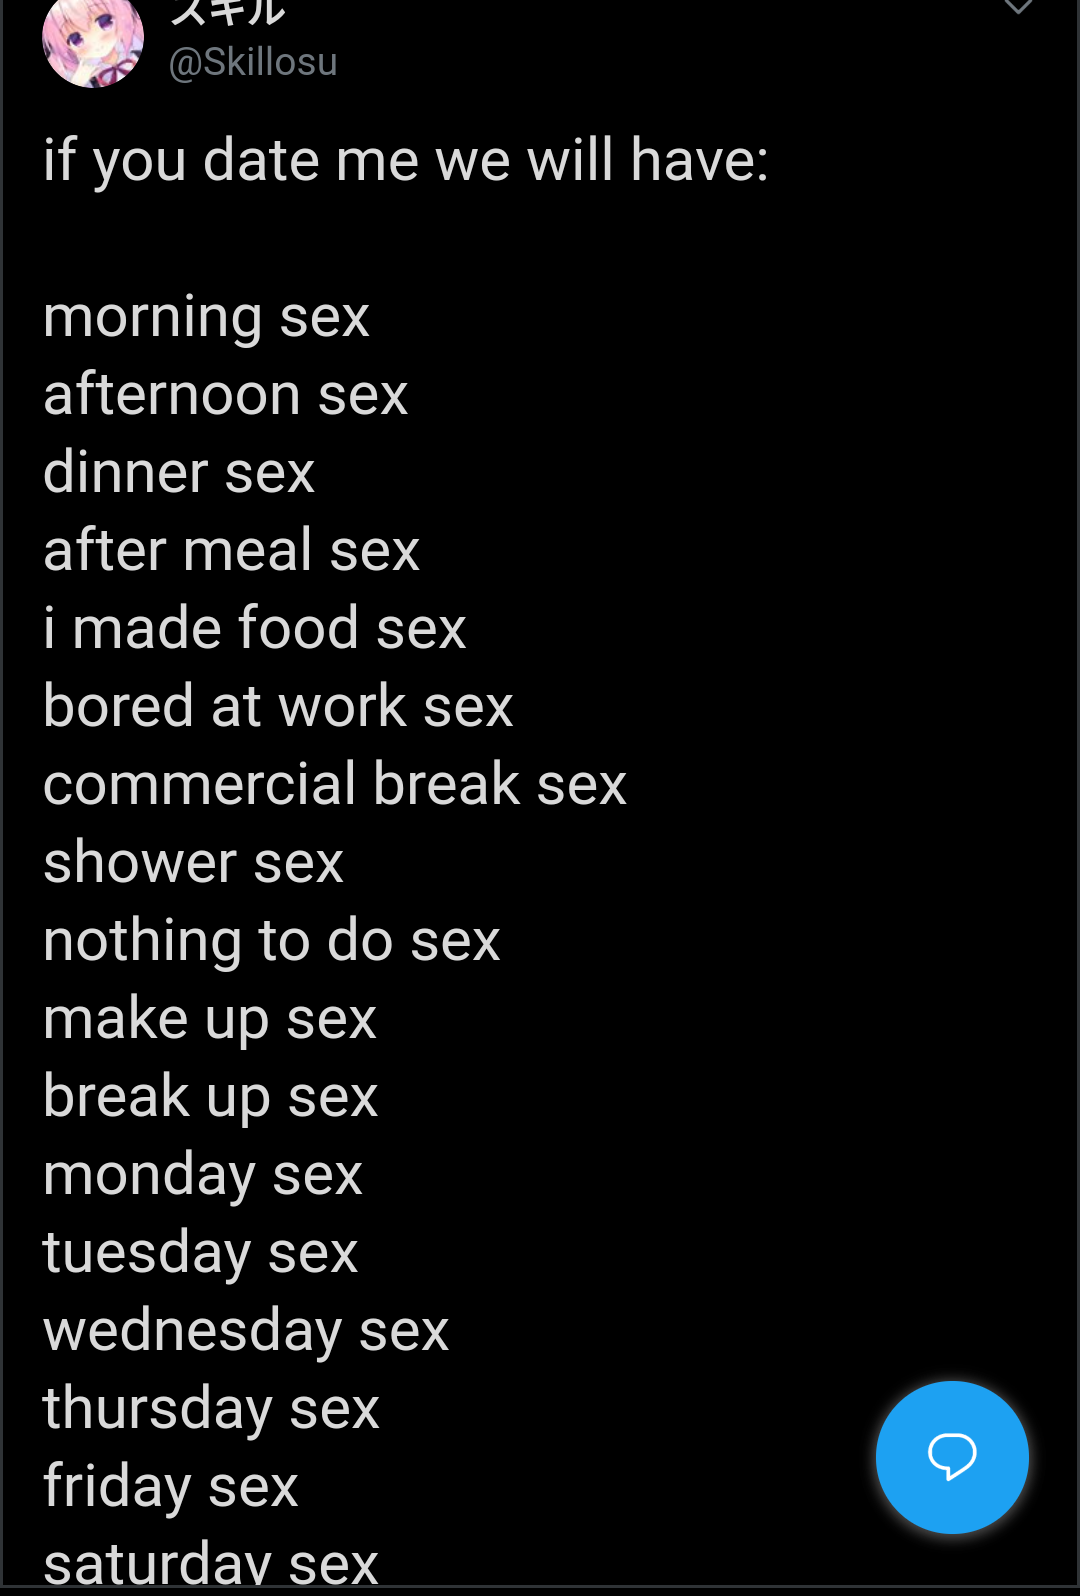 screenshot - 2FIL if you date me we will have morning sex afternoon sex dinner sex after meal sex i made food sex bored at work sex commercial break sex shower sex nothing to do sex make up sex break up sex monday sex tuesday sex wednesday sex thursday se